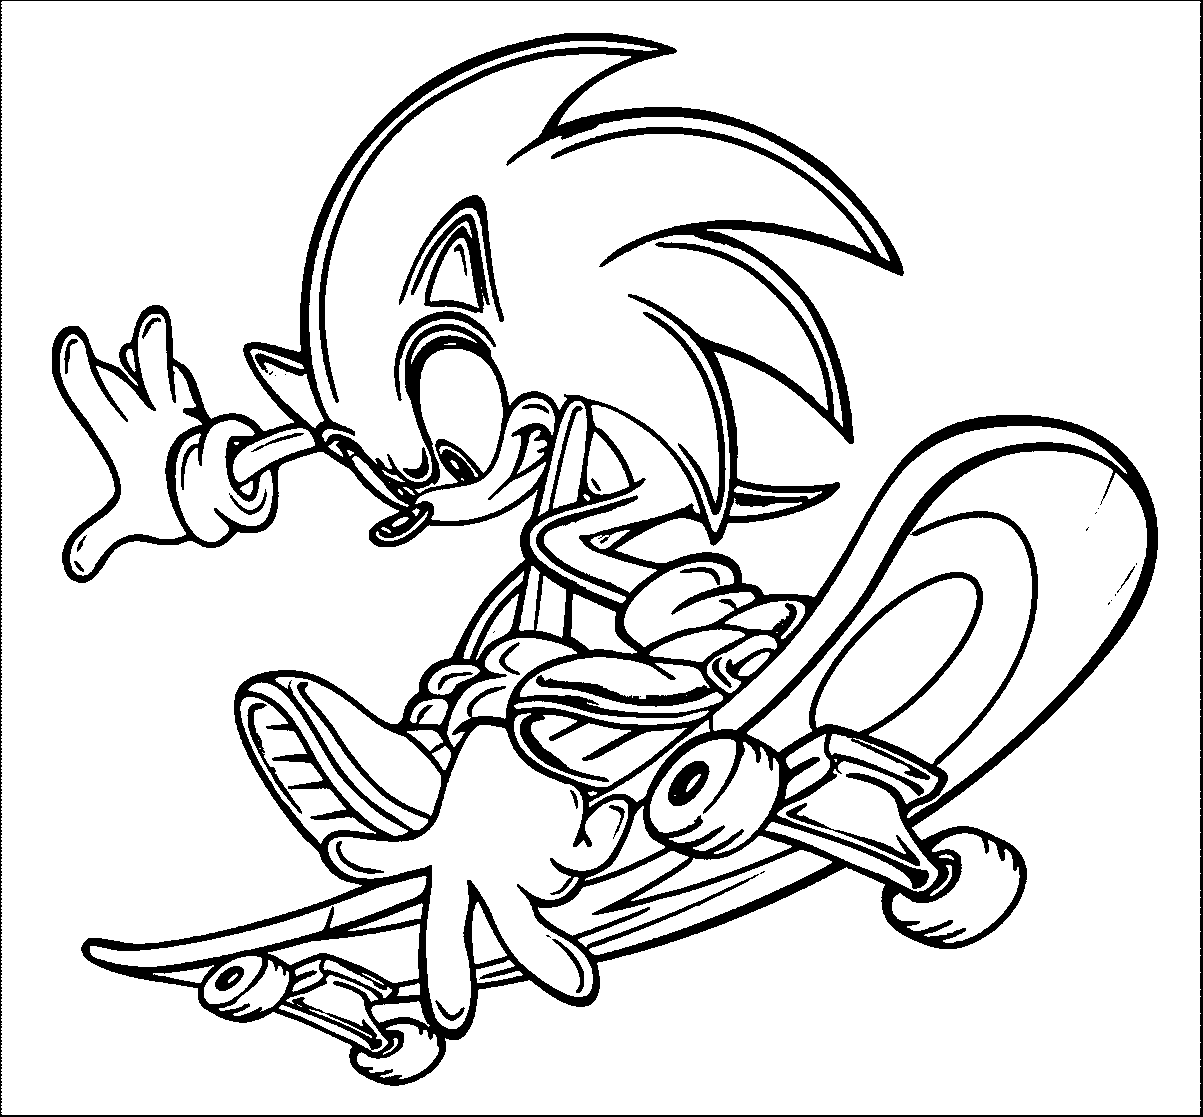 sonic skateboarding coloring pages Coloring4free